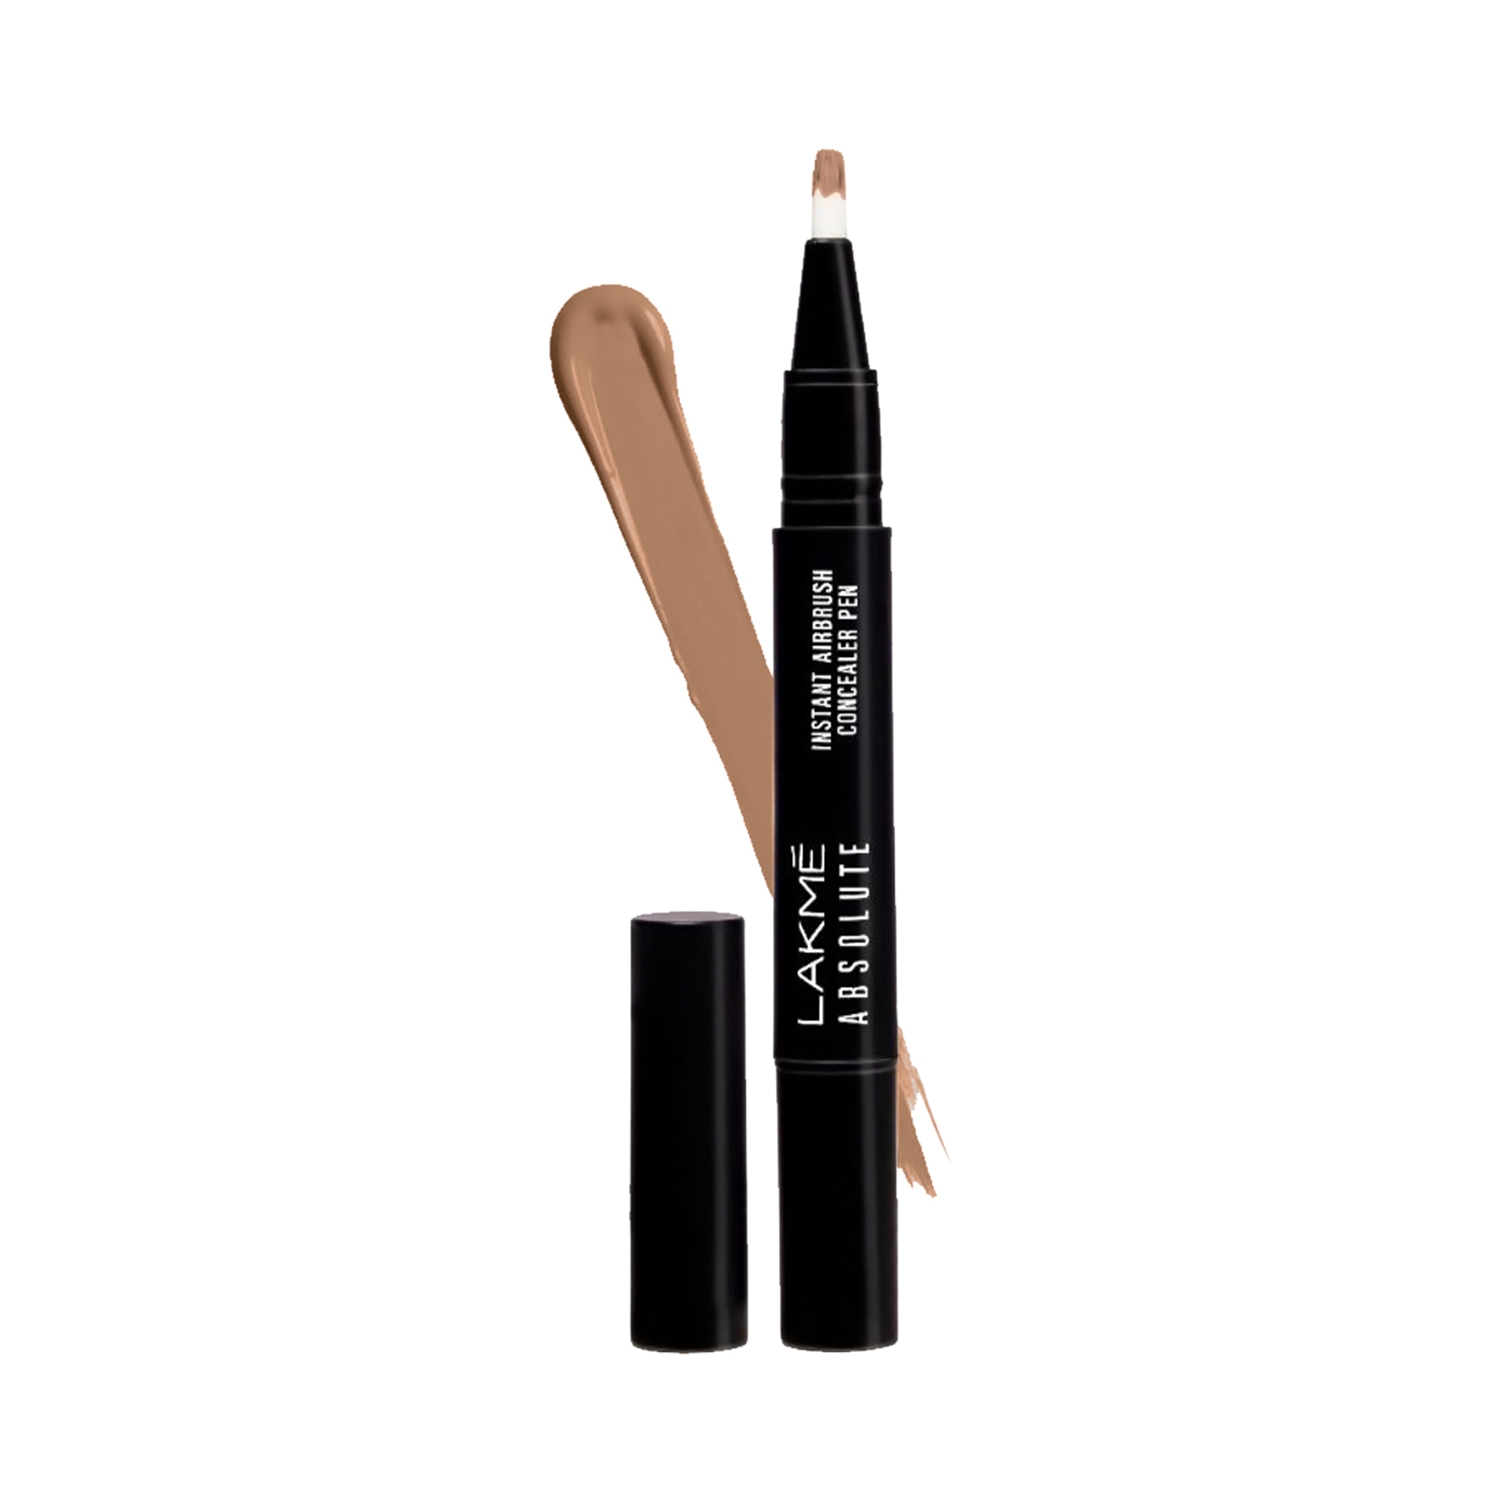 Lakme | Lakme Absolute Instant Airbrush Concealer Pen - Walnut (1.8g)